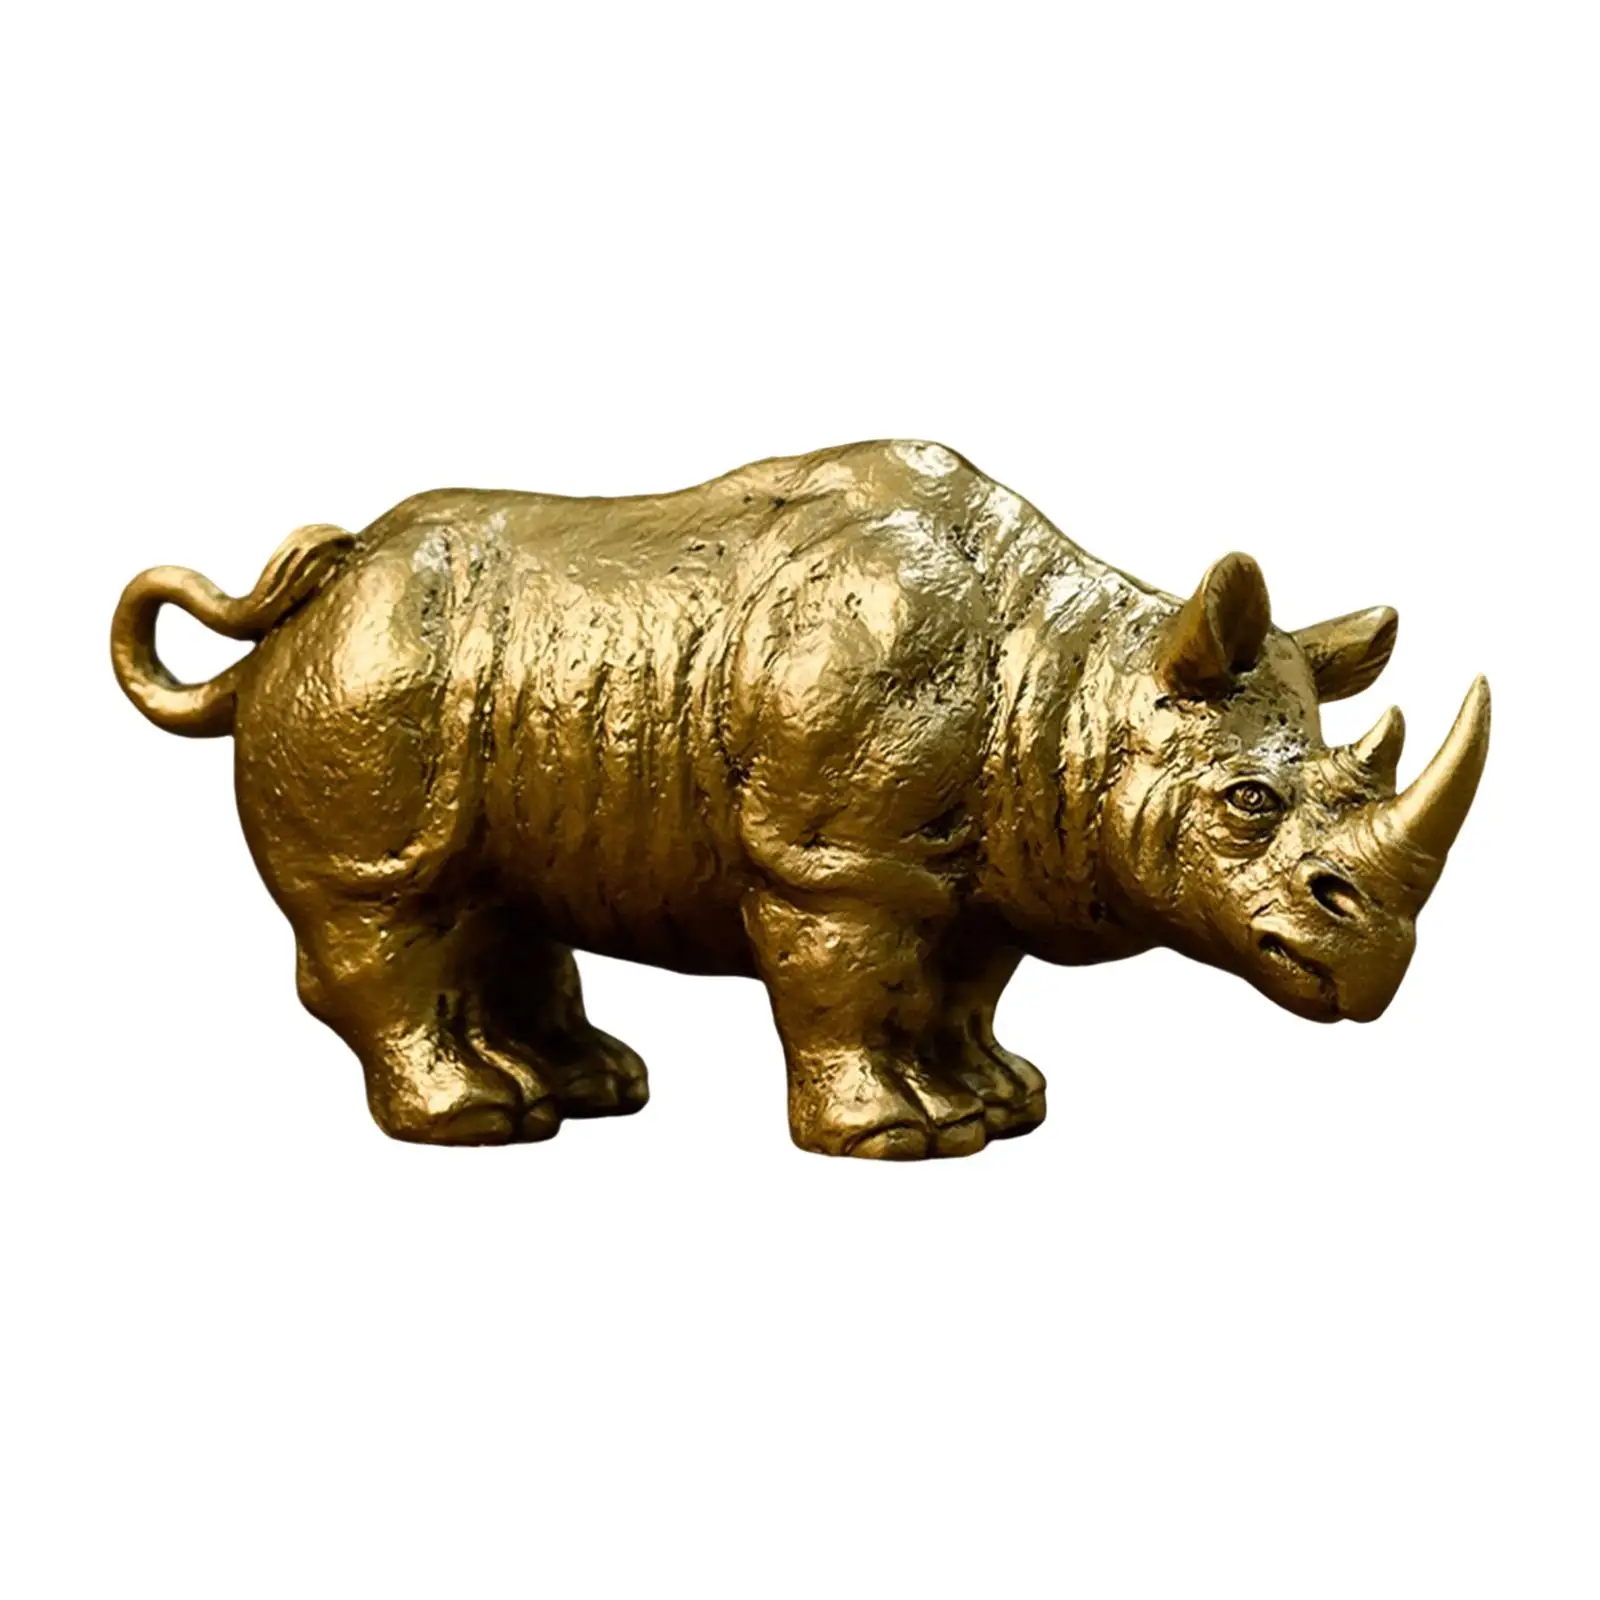 Resin Rhino Statue Collection Crafts Animal Sculpture Animal Figurines for Office Cabinet Home Decor Ornament